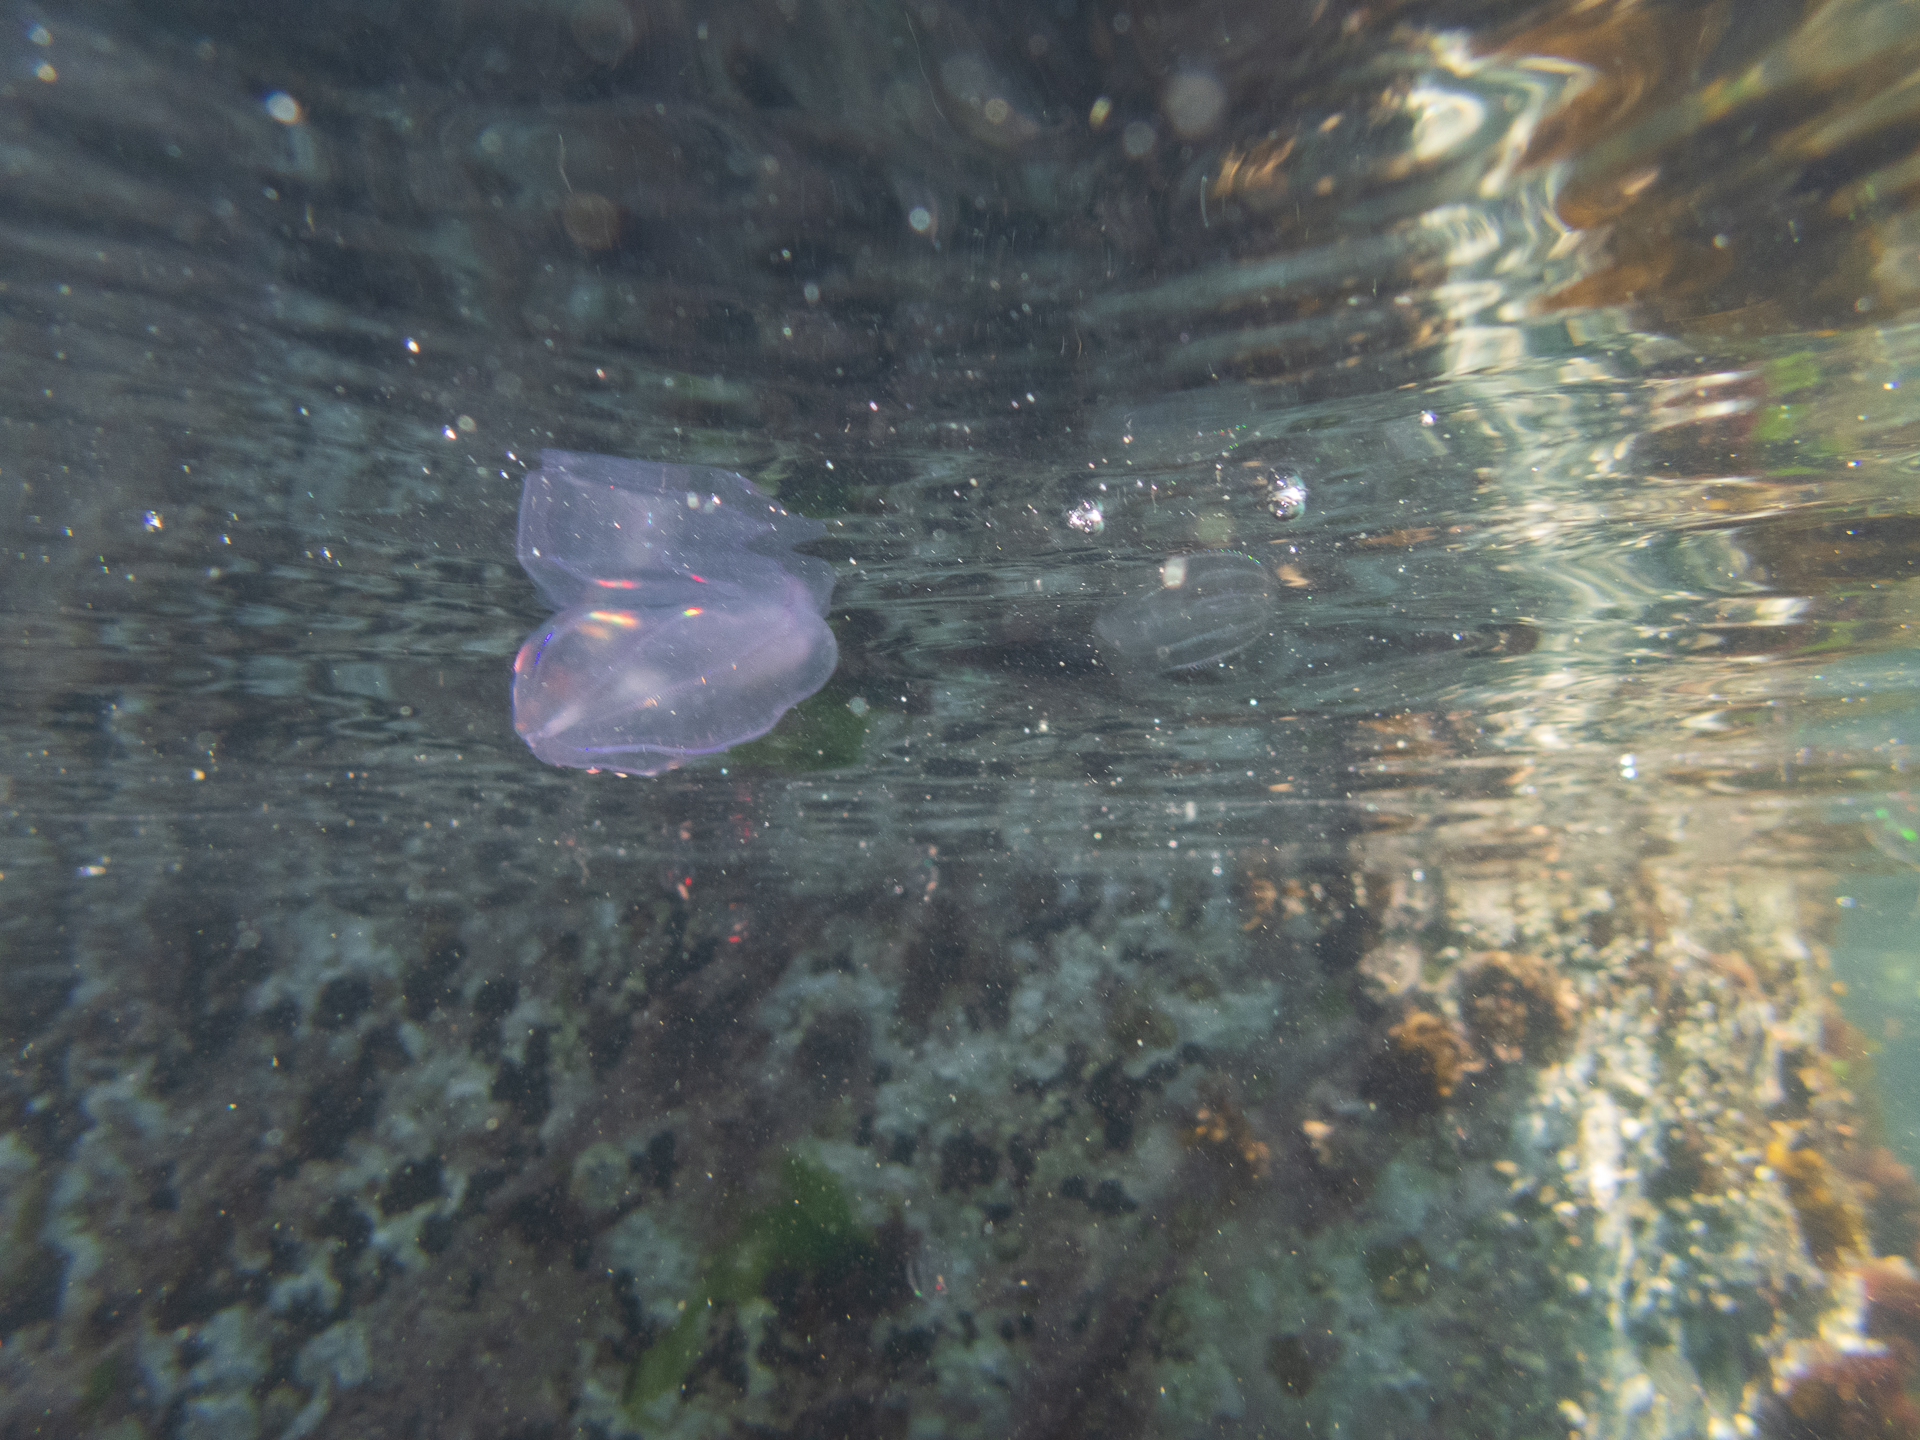 Comb Jelly (with some Gooseberry's in the background). Note the bioluminescence